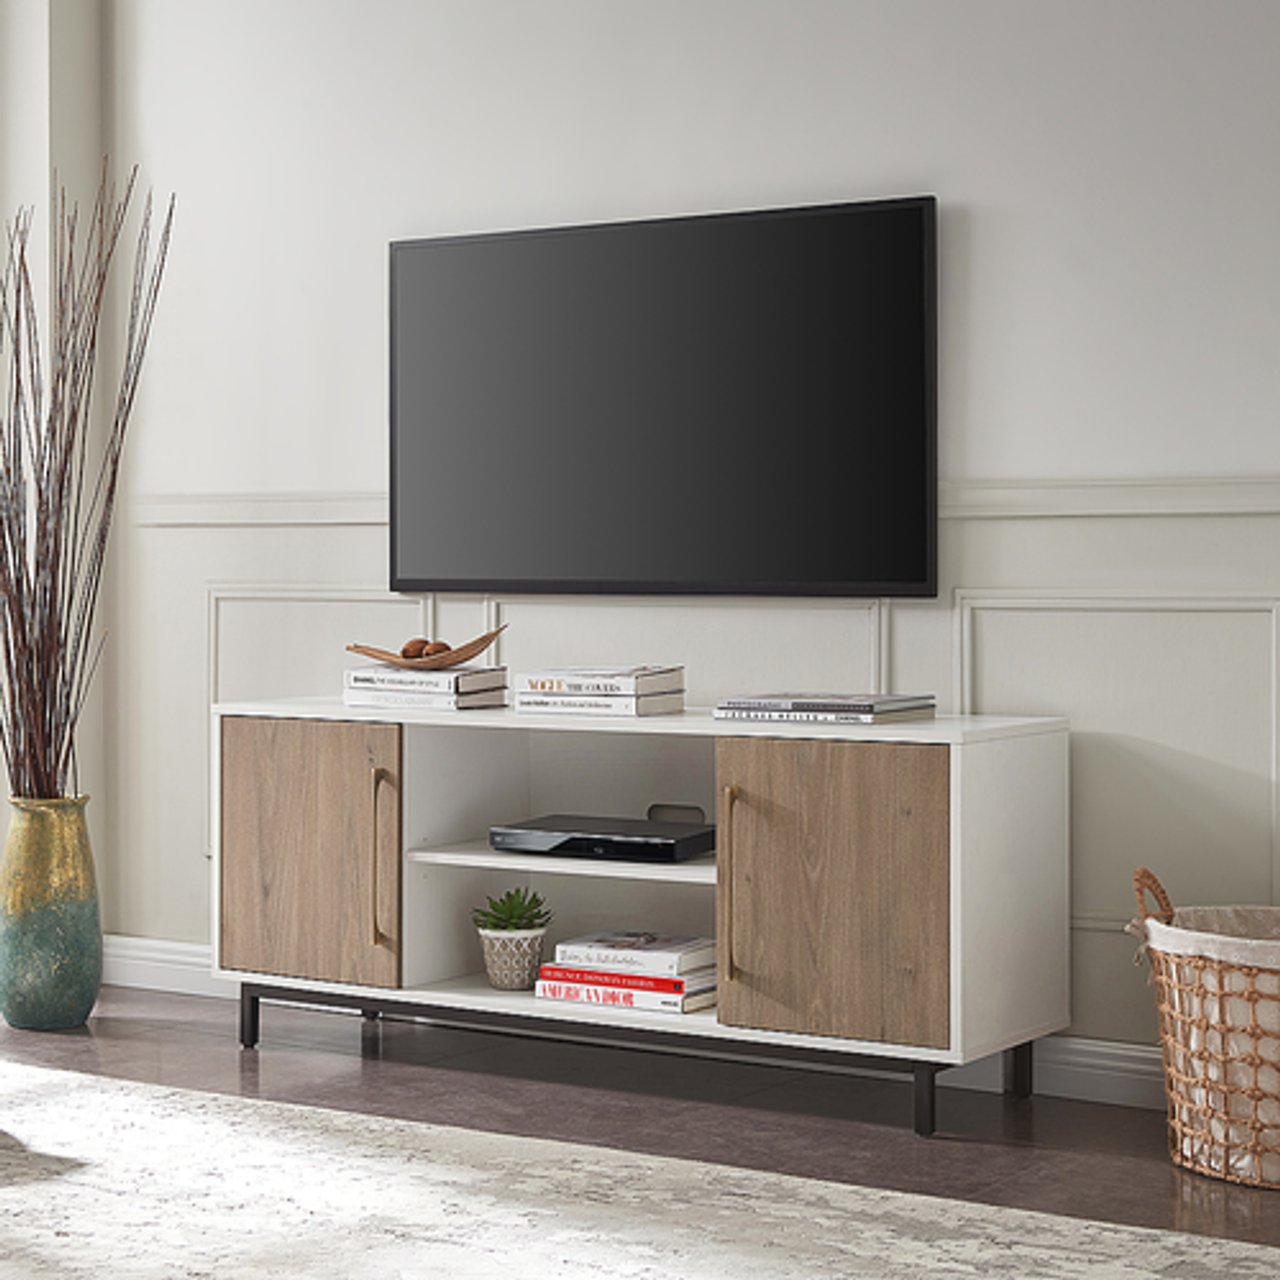 Camden&Wells - Julian TV Stand for TVs up to 65" - White/Antiqued Gray Oak